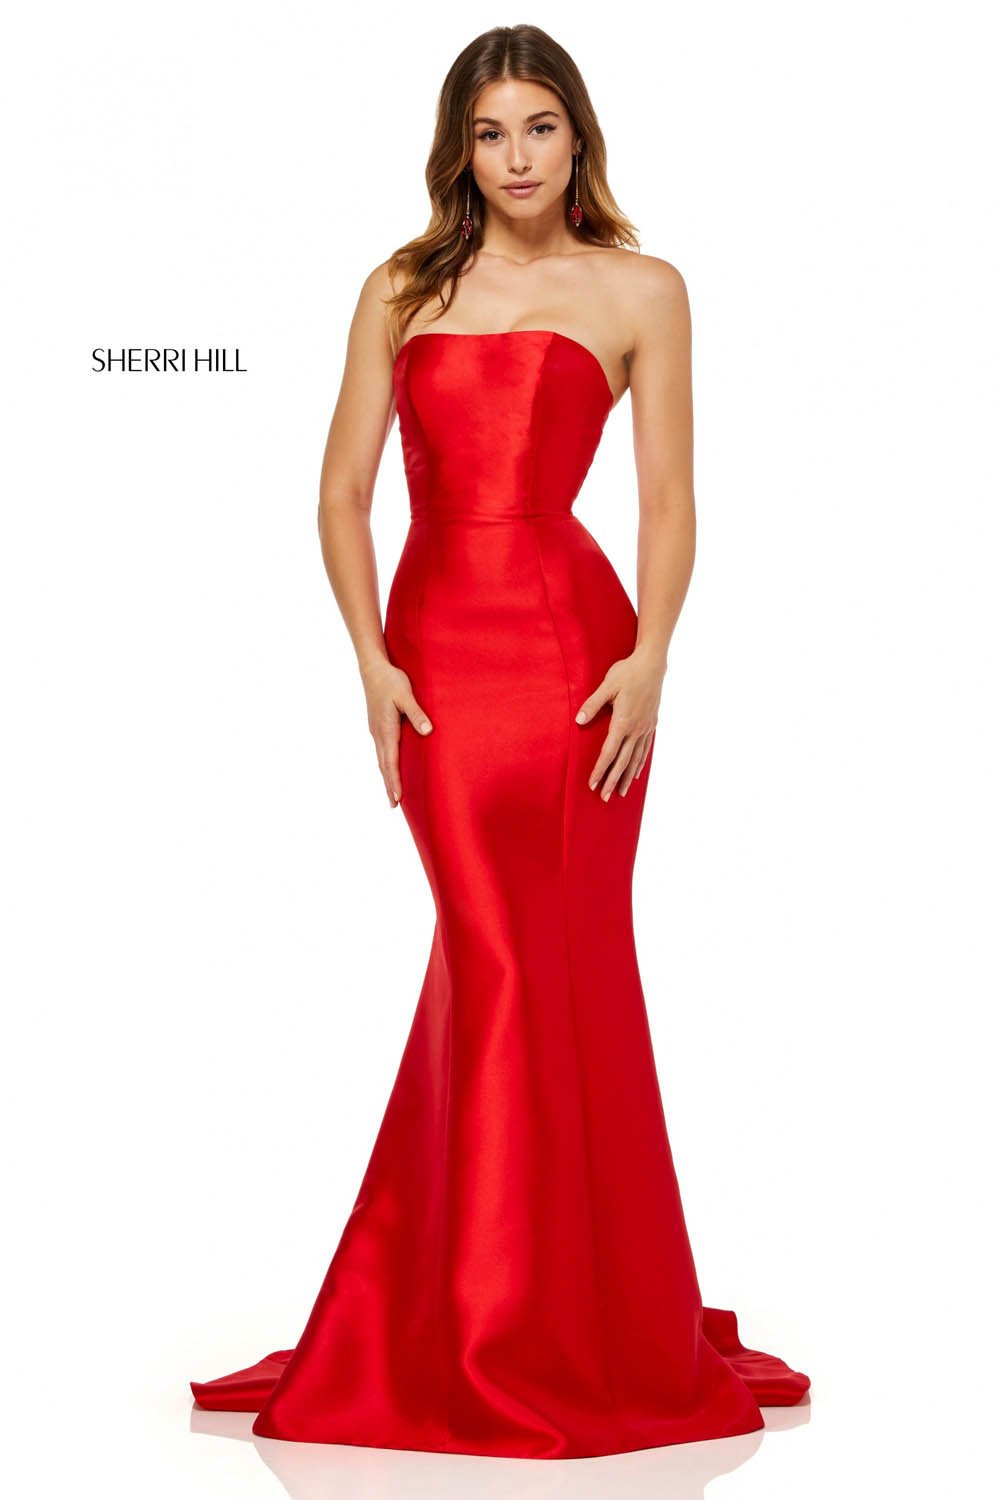 Sherri Hill 52485 dress images in these colors: Red, Black, Light Blue.